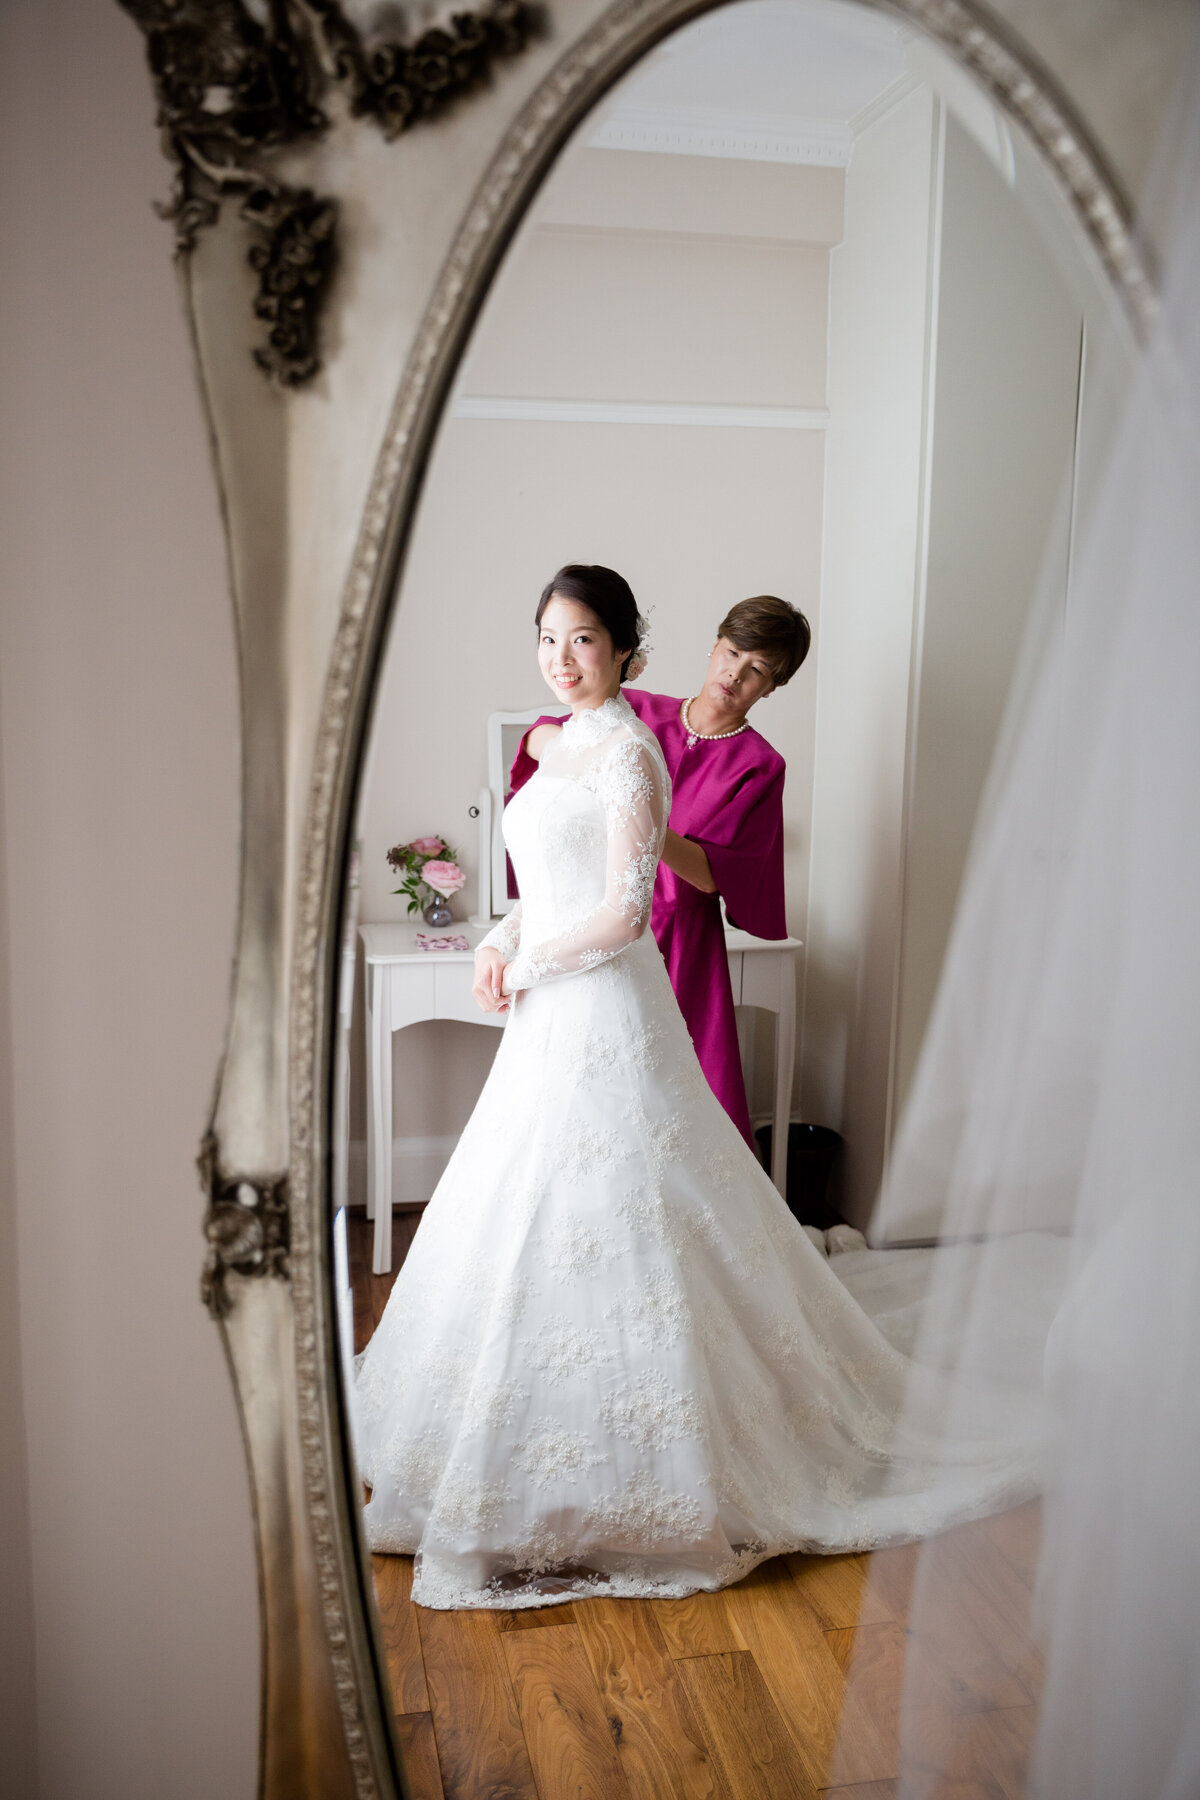 Mother of the Bride and the Bride reflected in a mirror